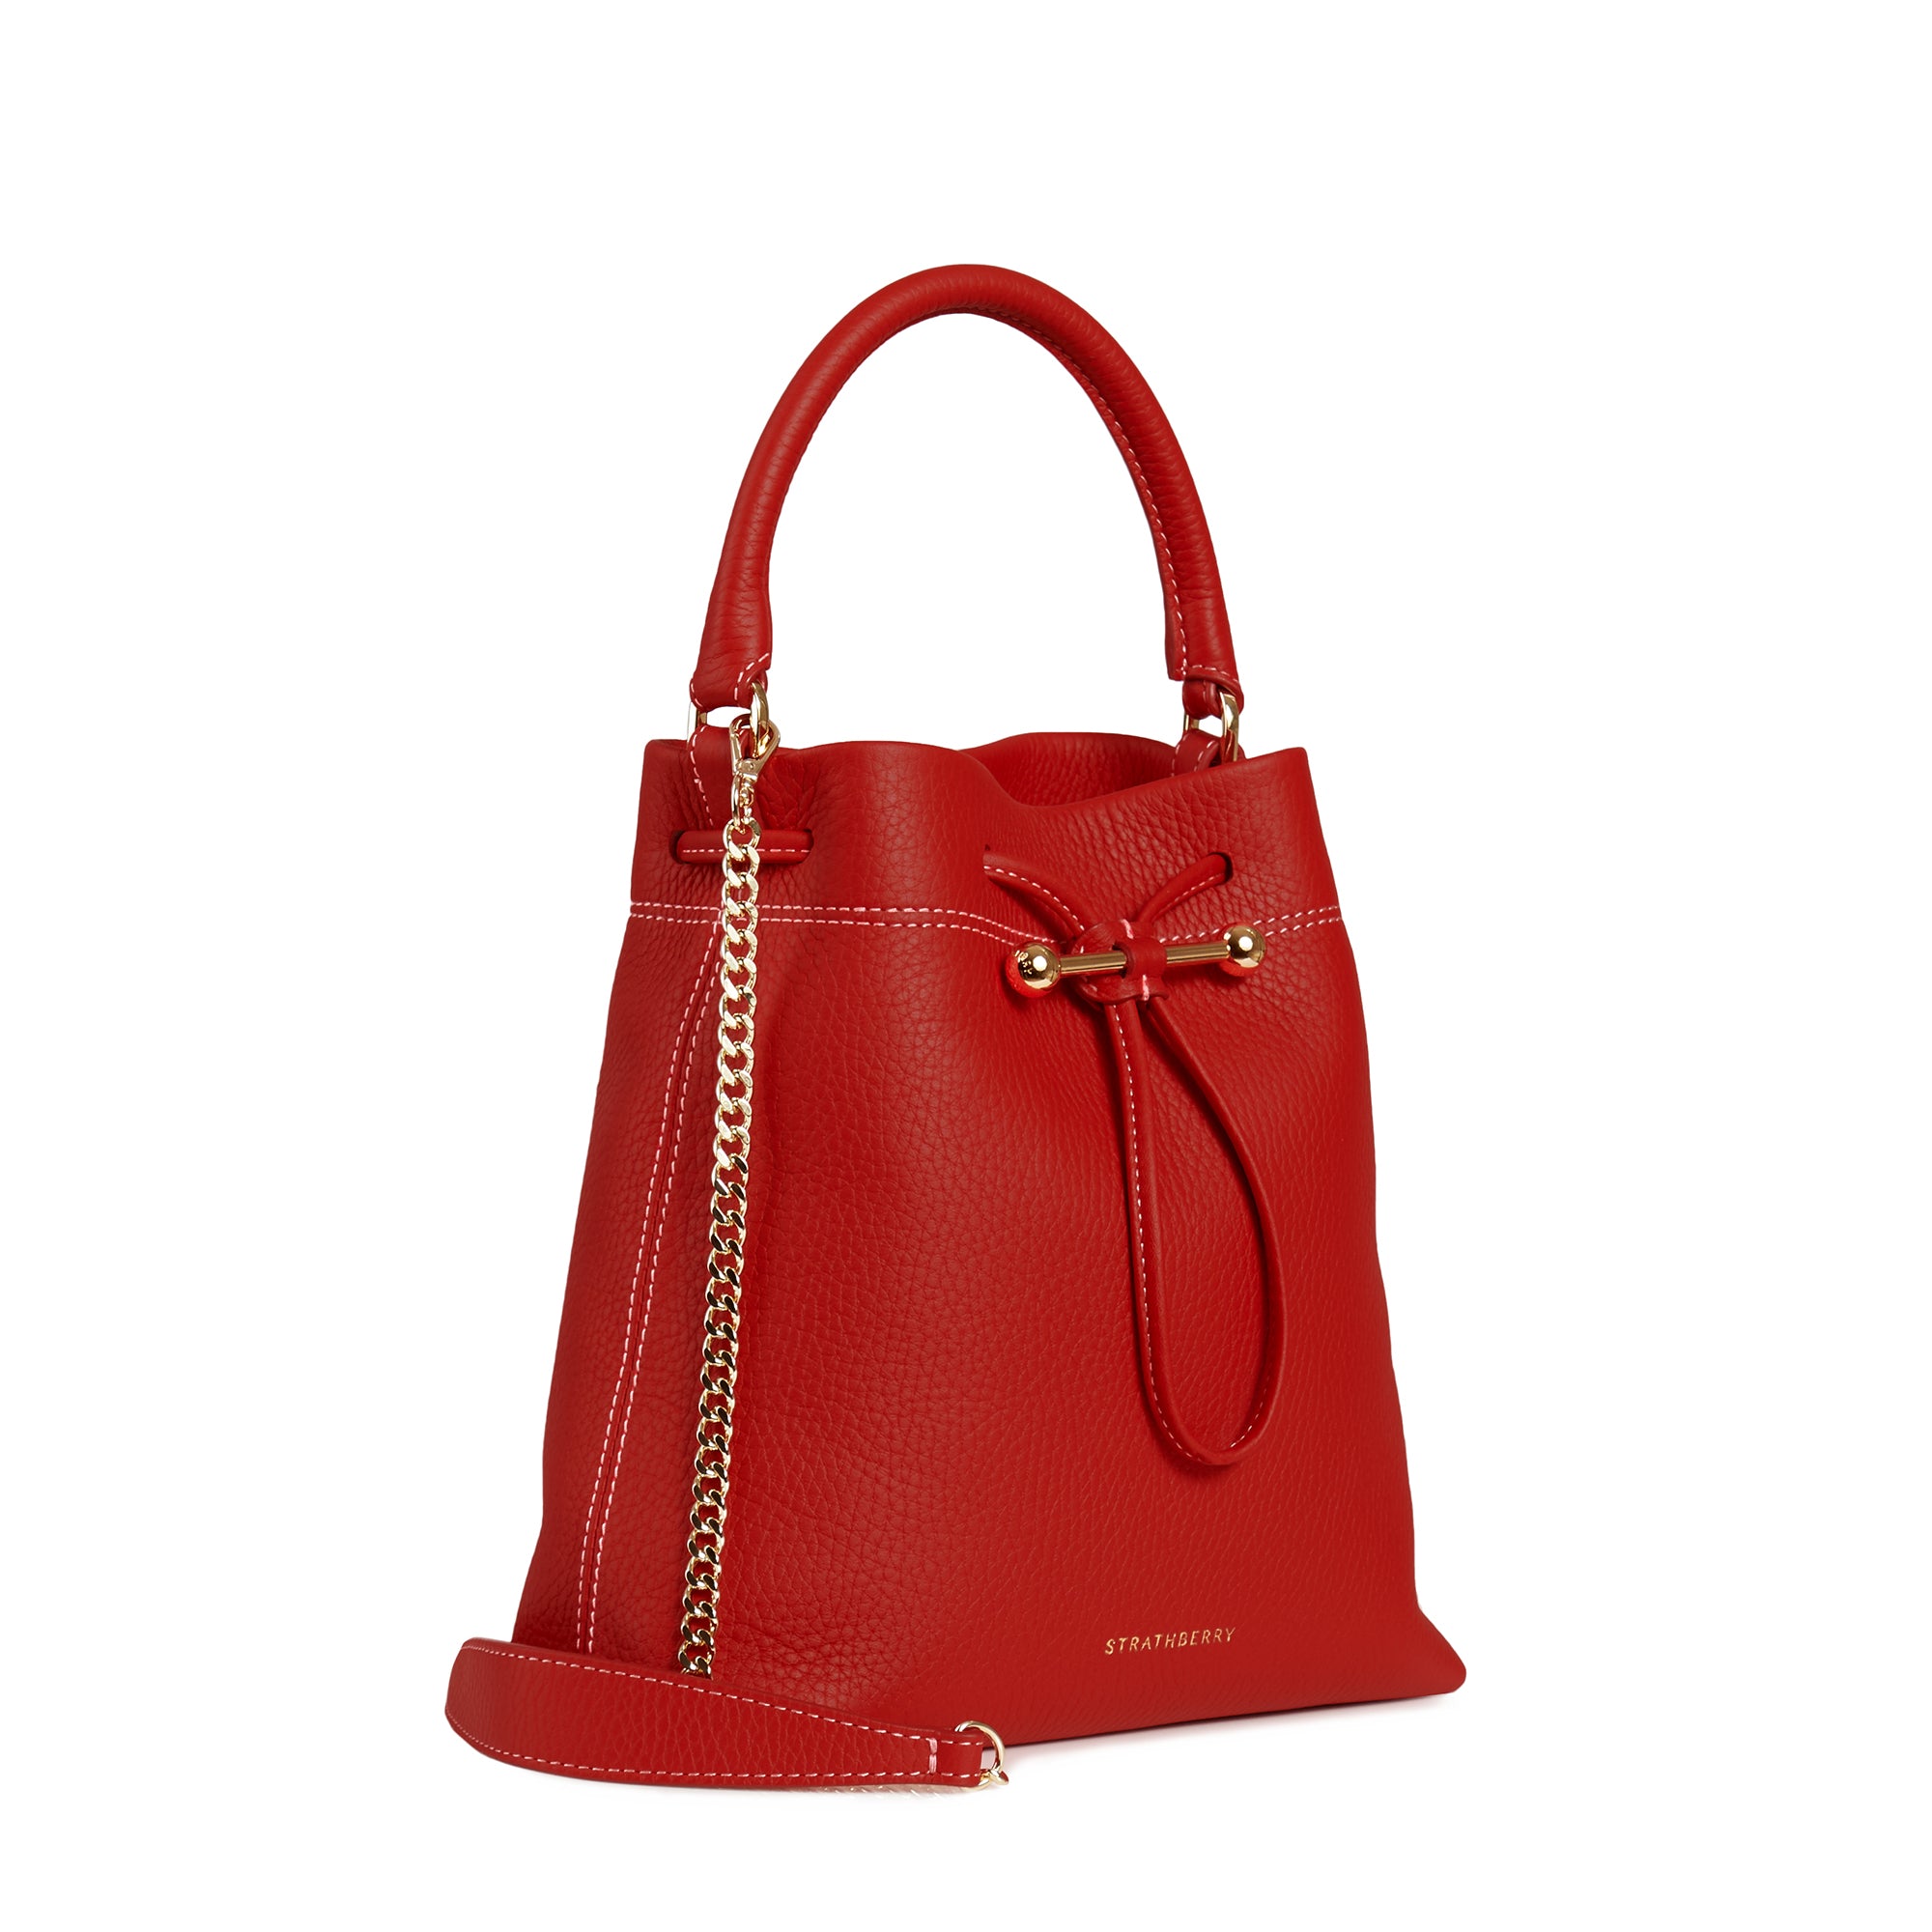 SJP by Sarah Jessica Parker Women's Leather City Osette Strathberry Bag Red